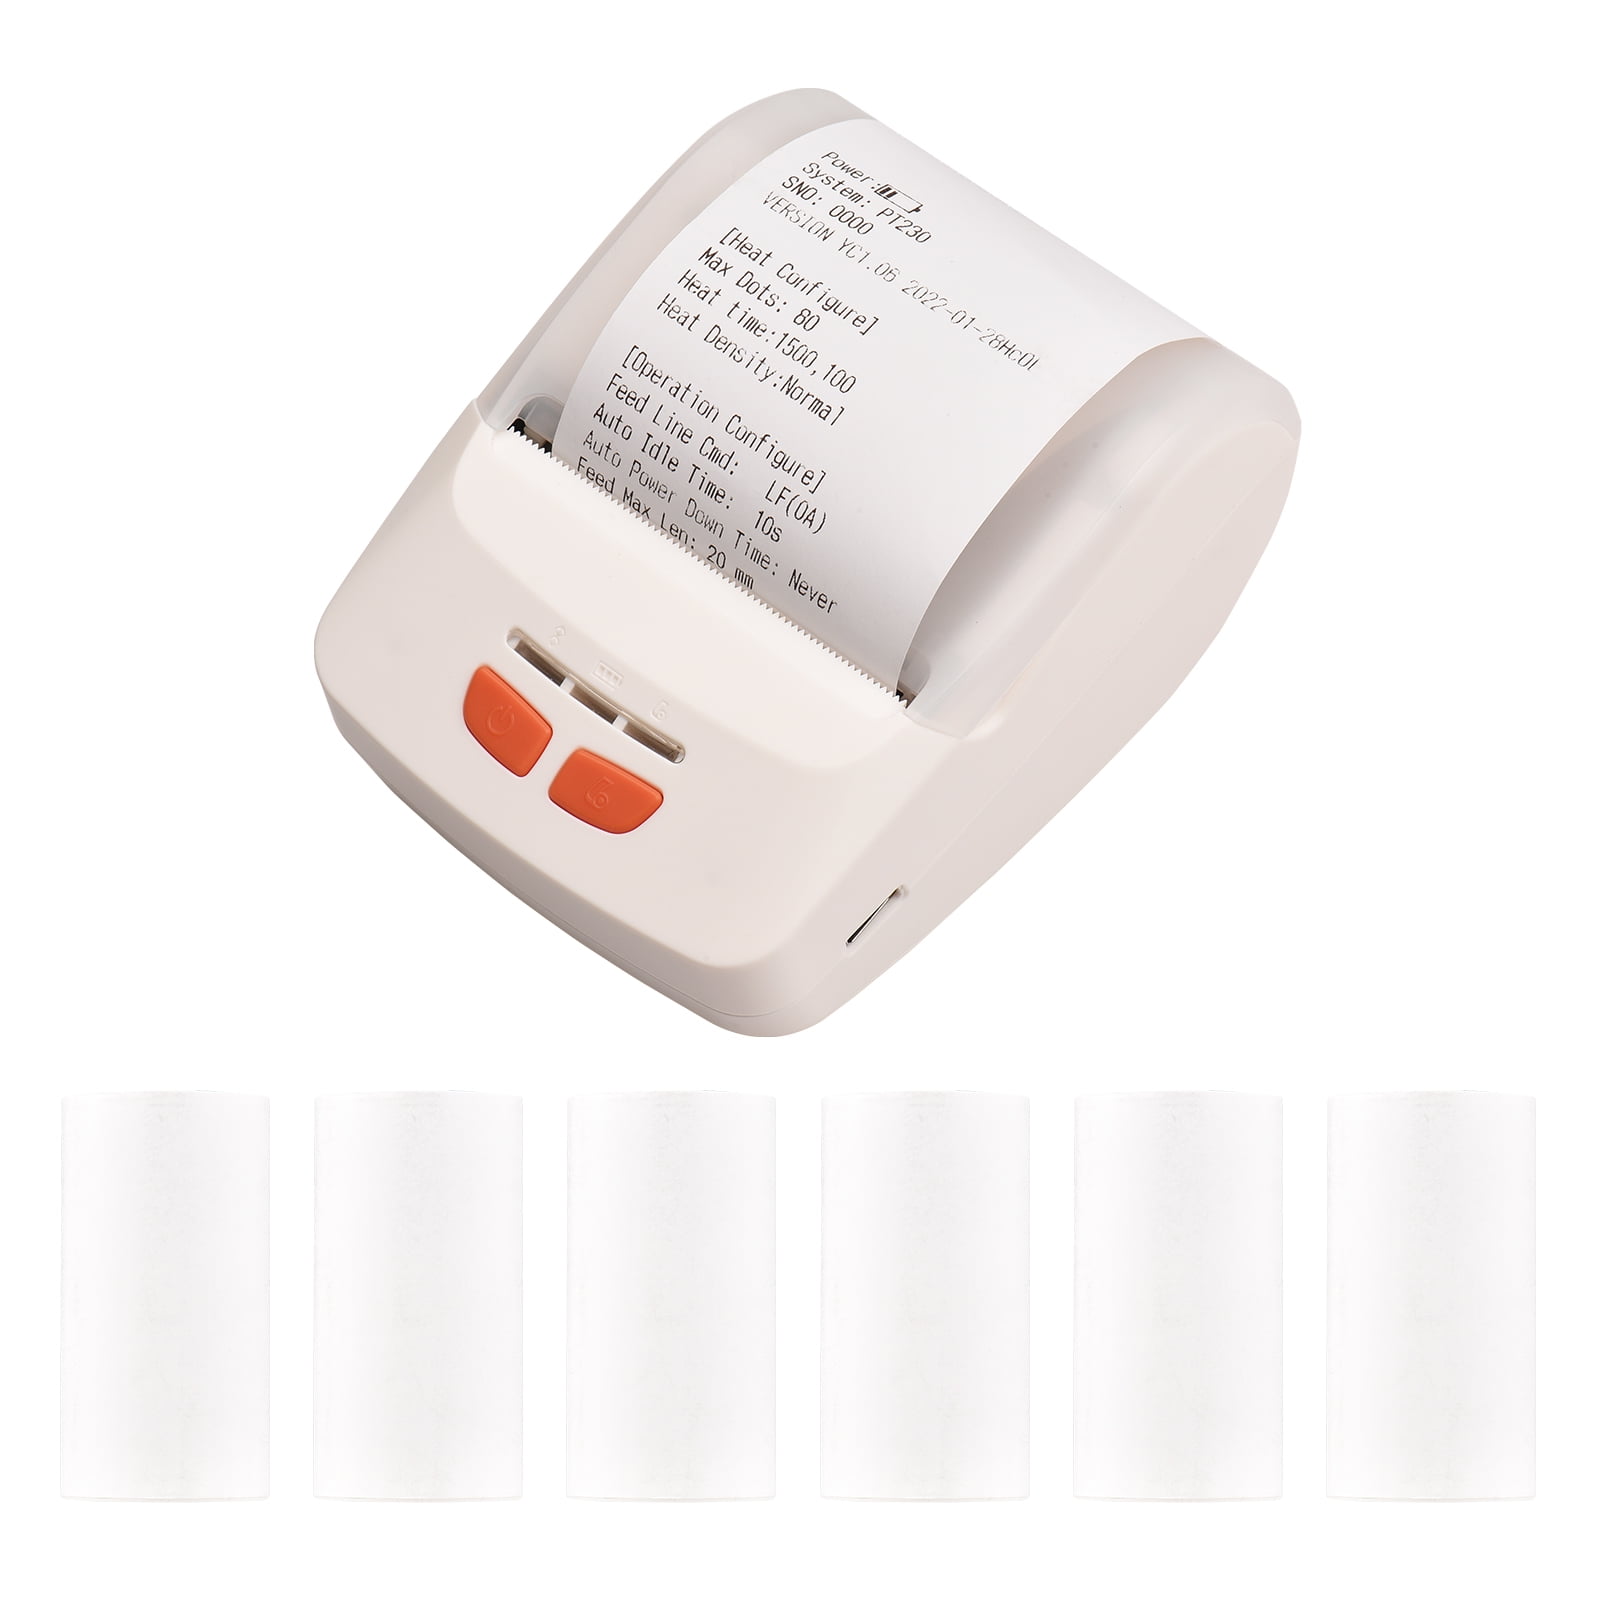 Photp Printerbluetooth 58mm Thermal Receipt Printer - Compatible With  Android & Ios